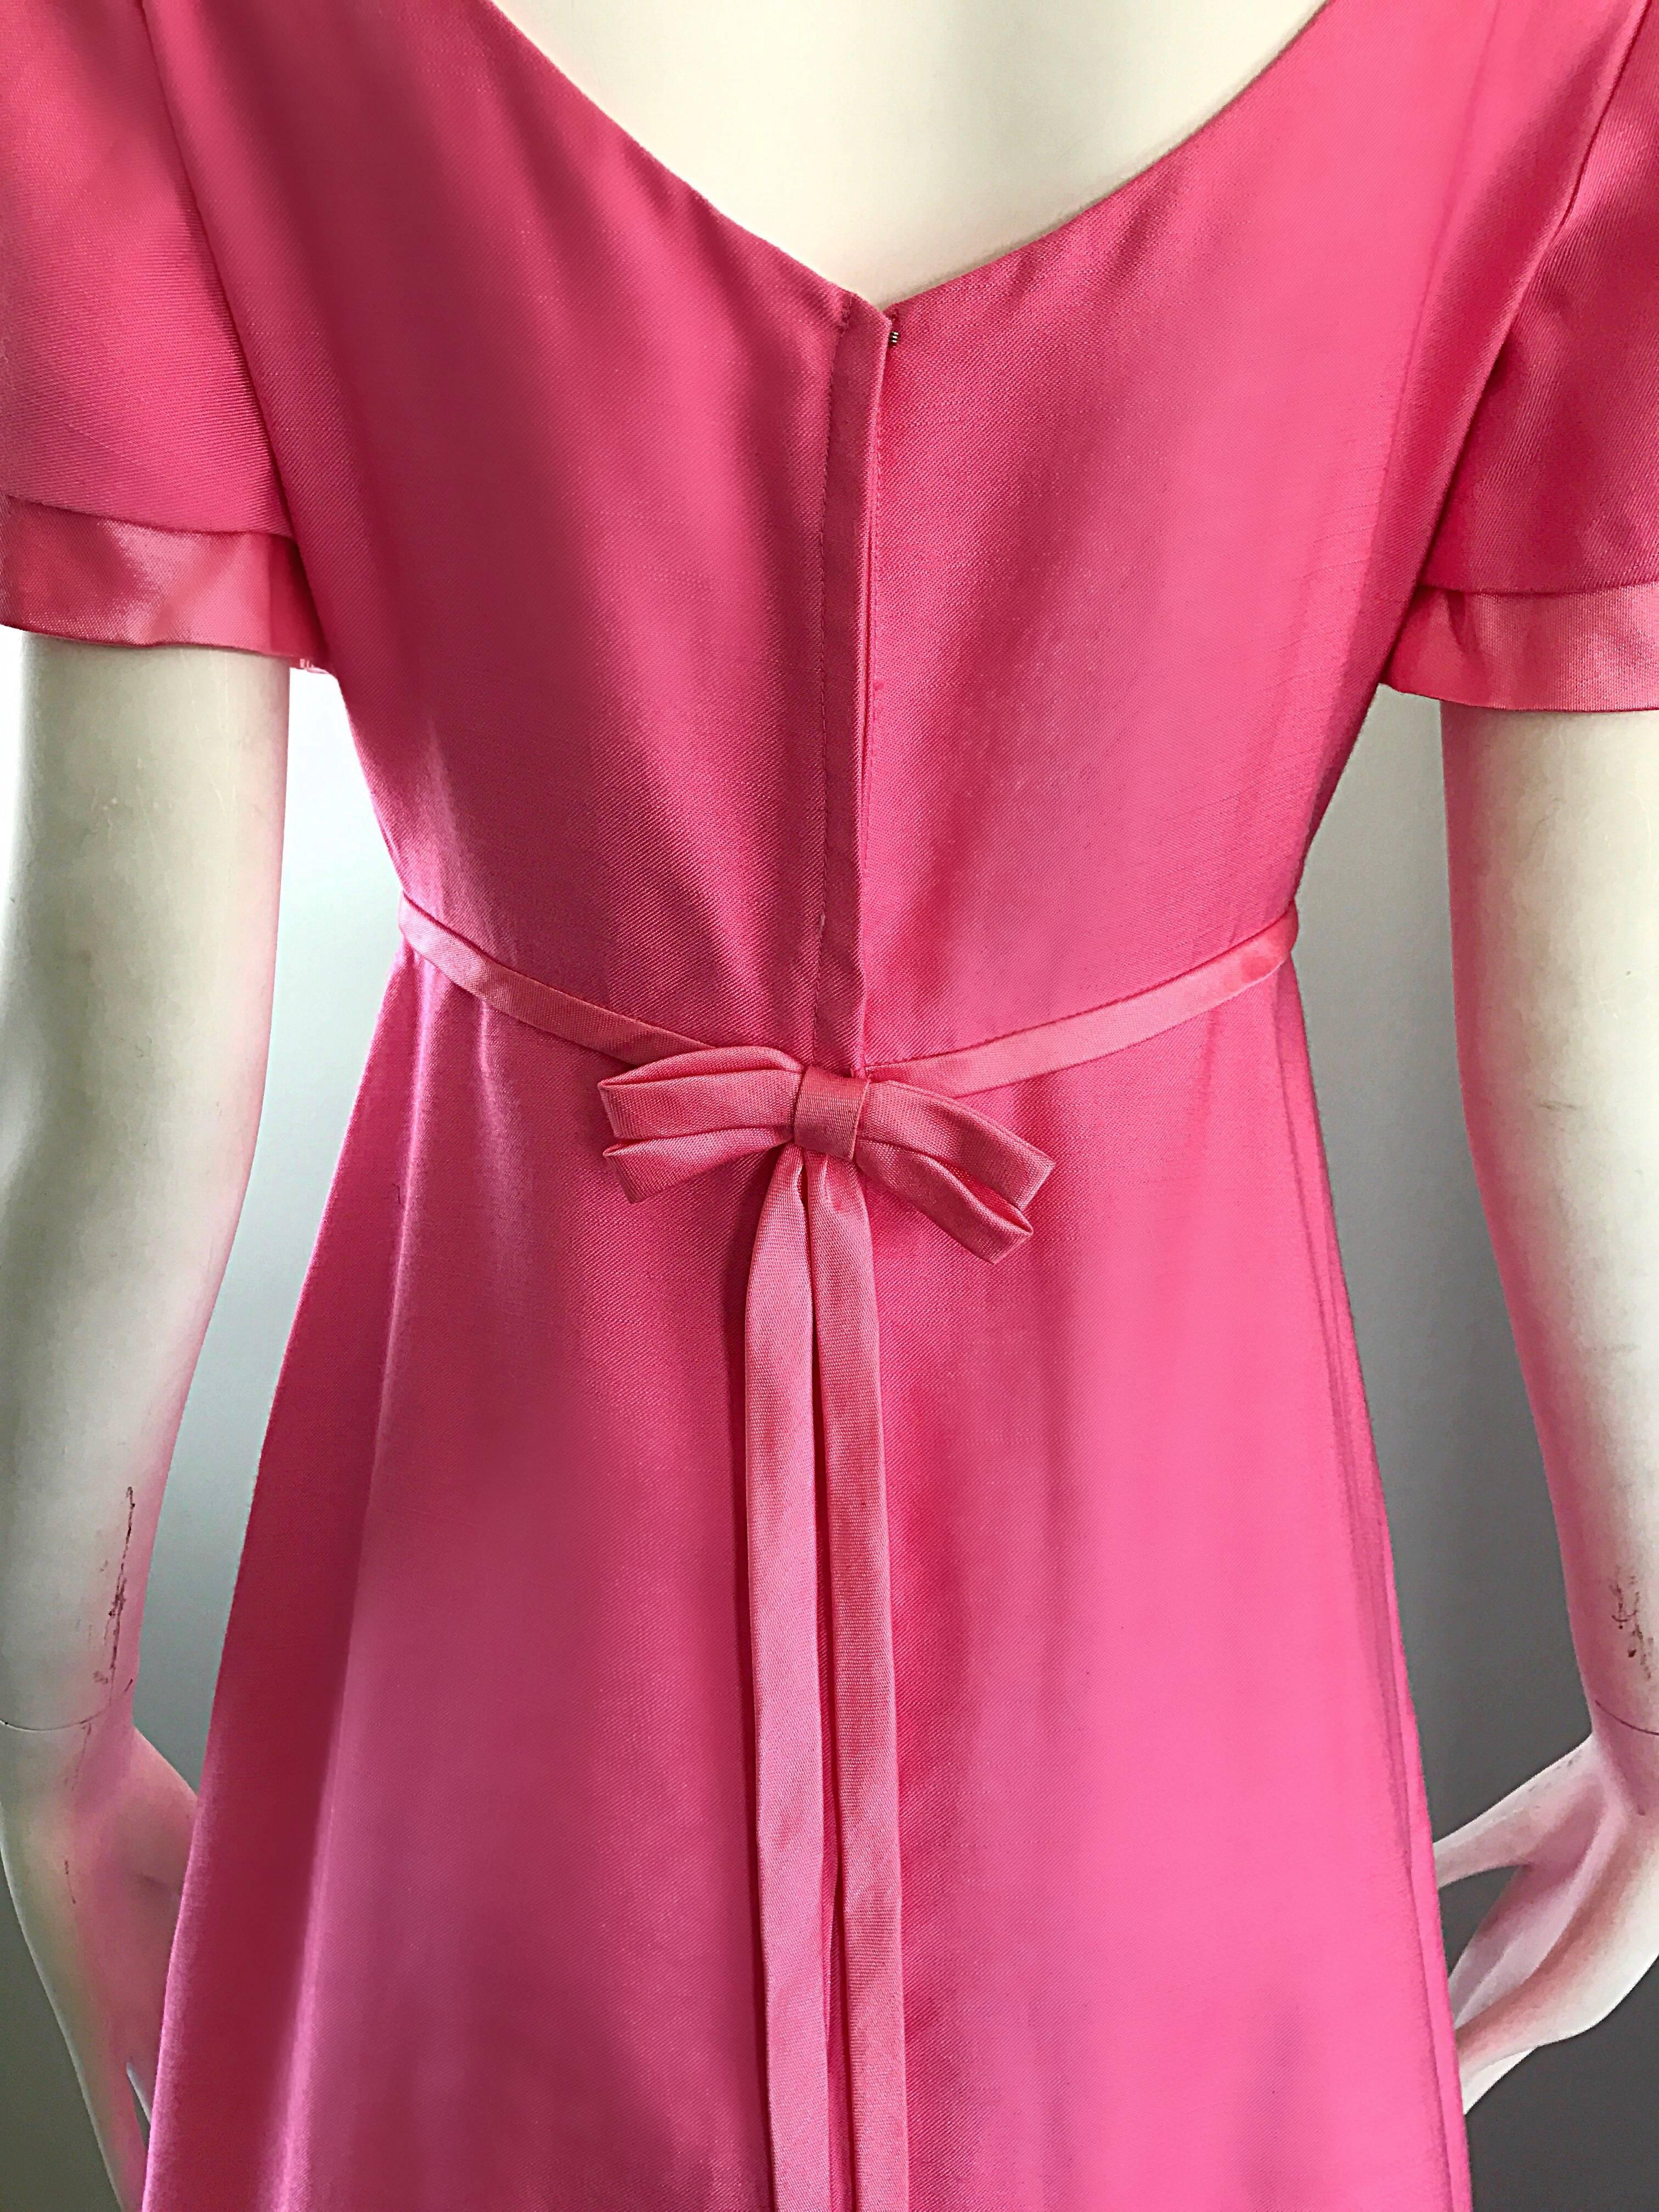 1970s Emma Domb Bubblegum Pink Short Sleeve Vintage 70s Empire Waist Maxi Dress In Excellent Condition For Sale In San Diego, CA